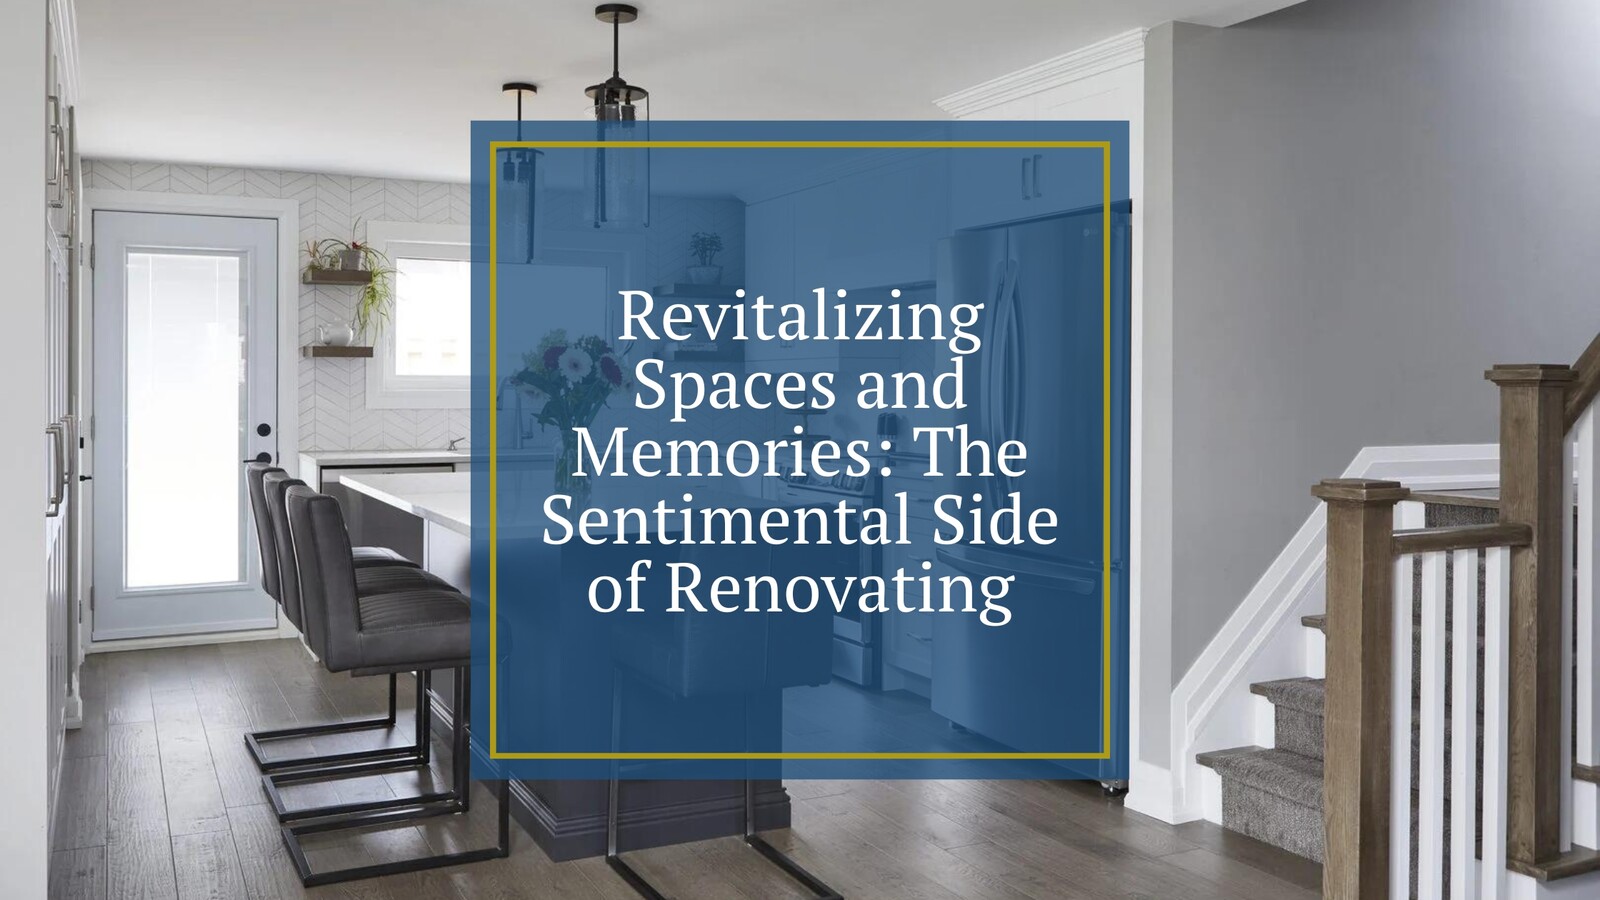 Revitalizing Spaces and Memories: The Sentimental Side of Renovating